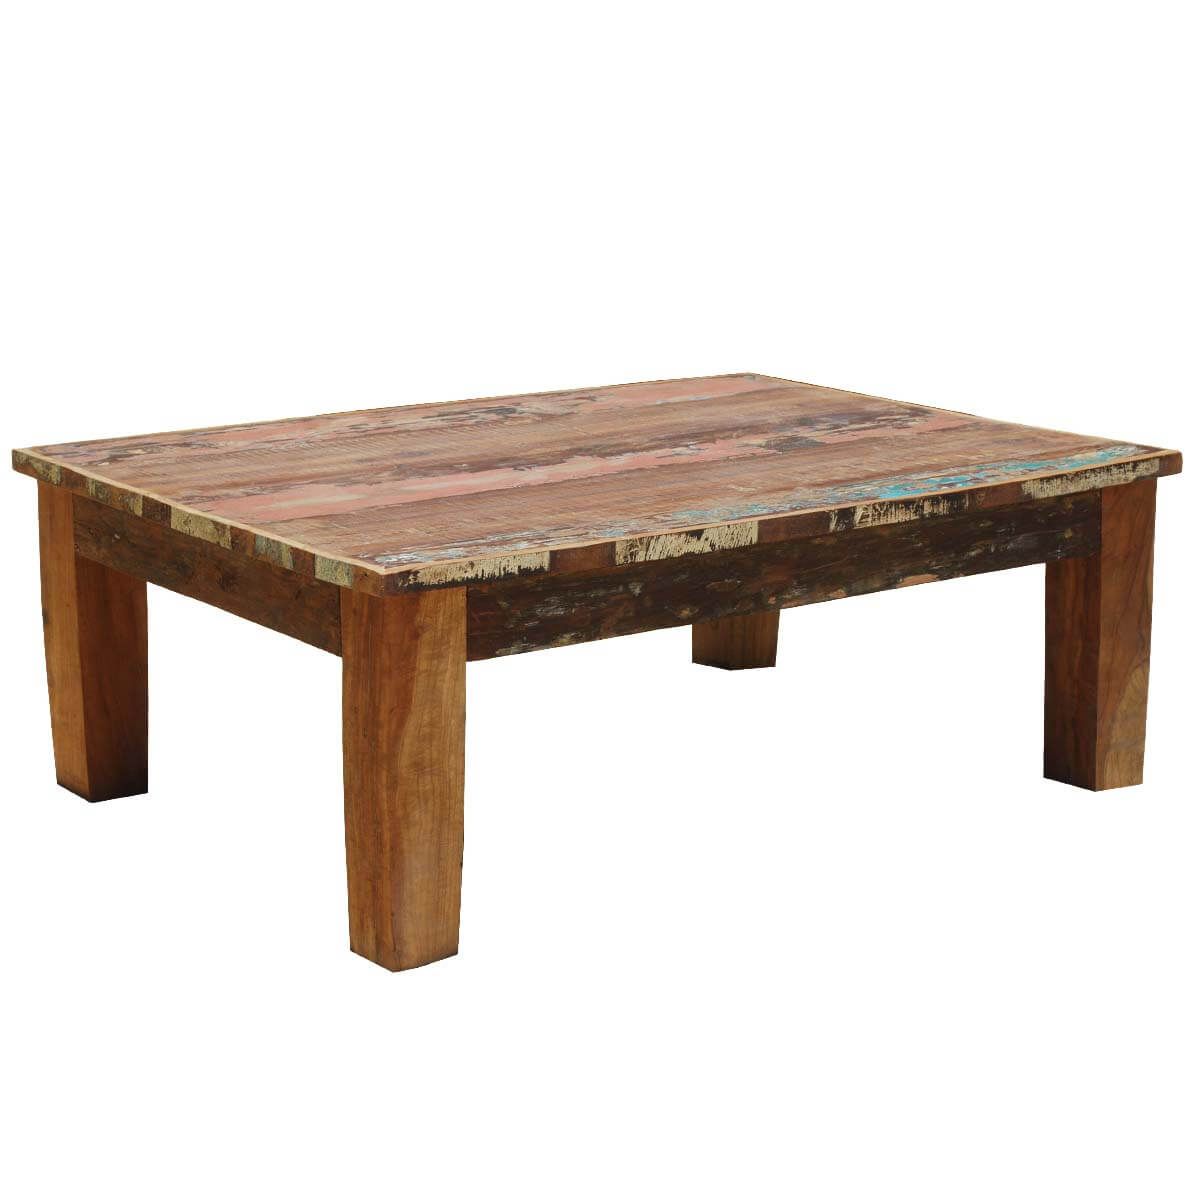 Culbertson Rustic Reclaimed Wood Rectangle Coffee Table Pertaining To Barnwood Coffee Tables (View 12 of 15)